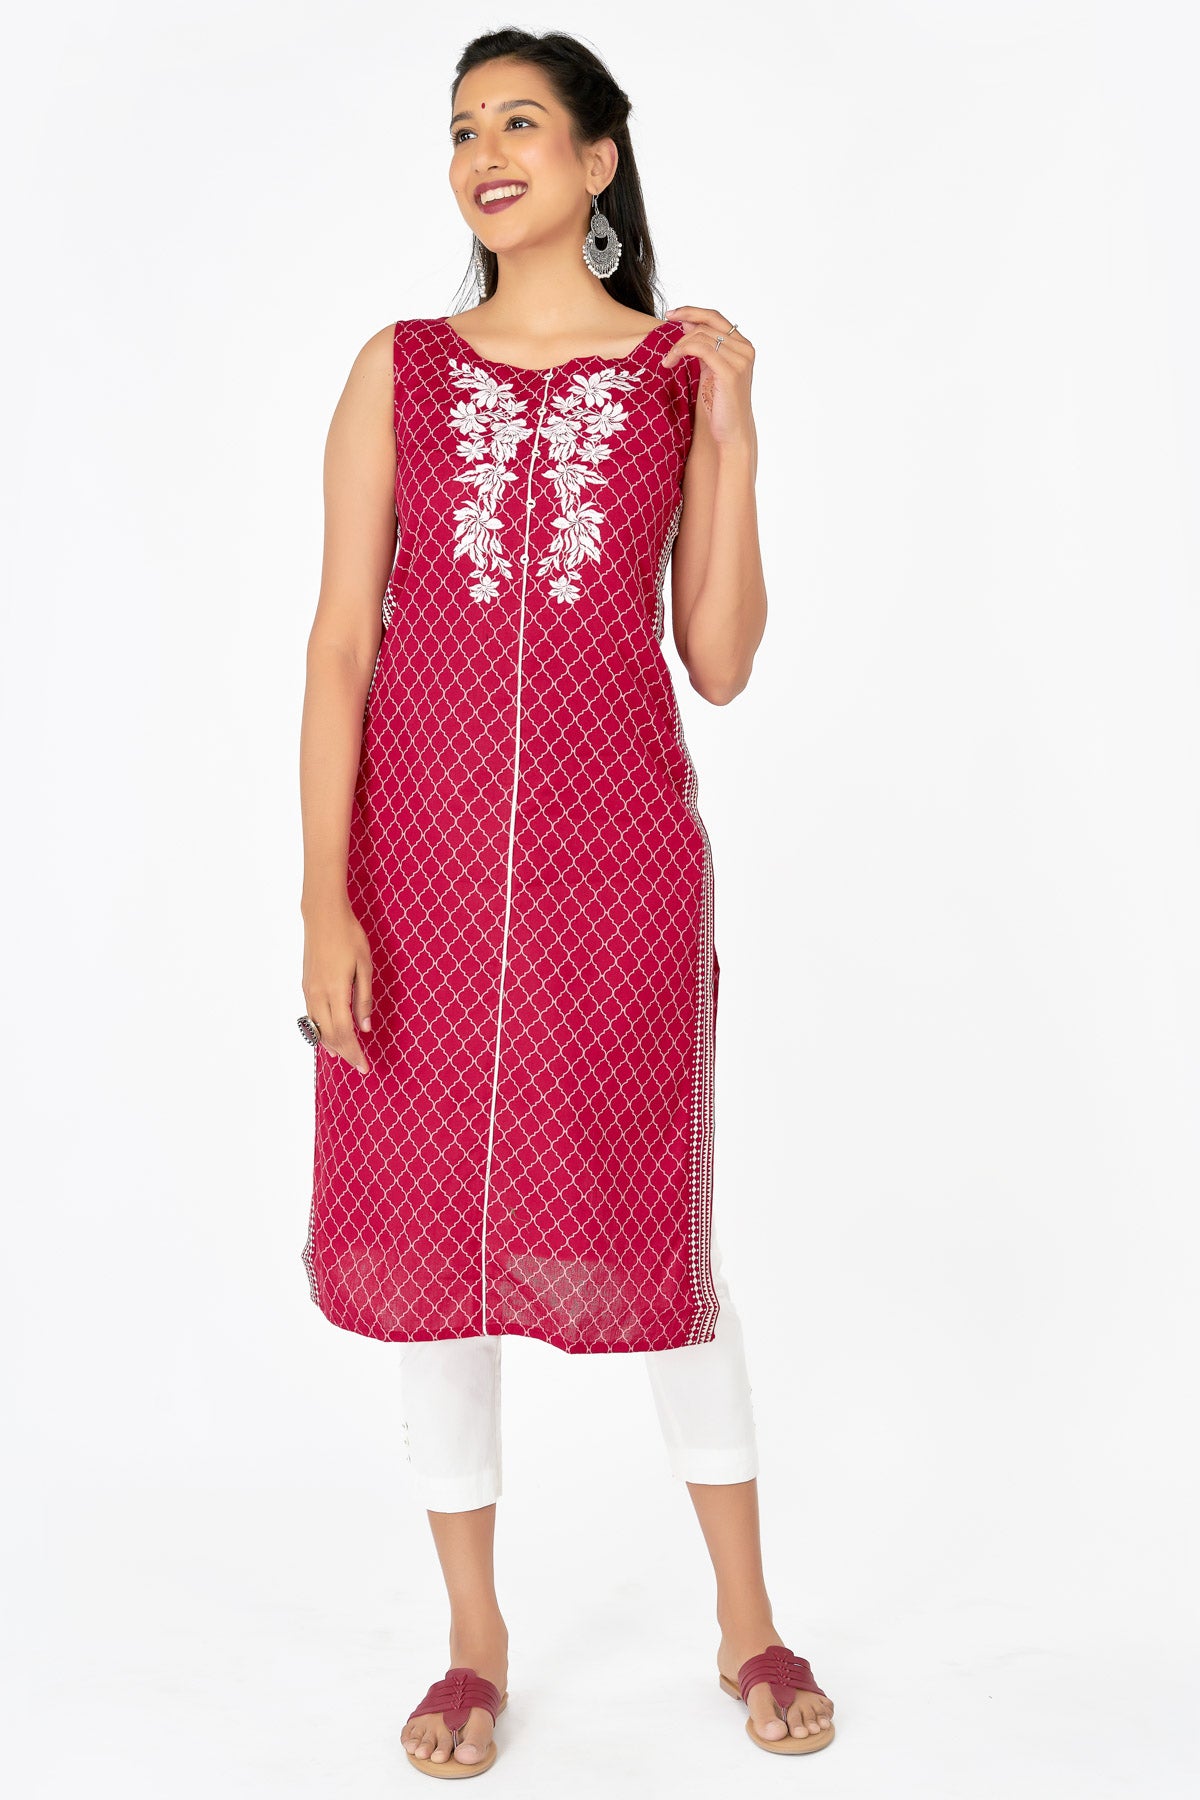 All Over Geometric Printed With Floral Embroidered Kurta Red